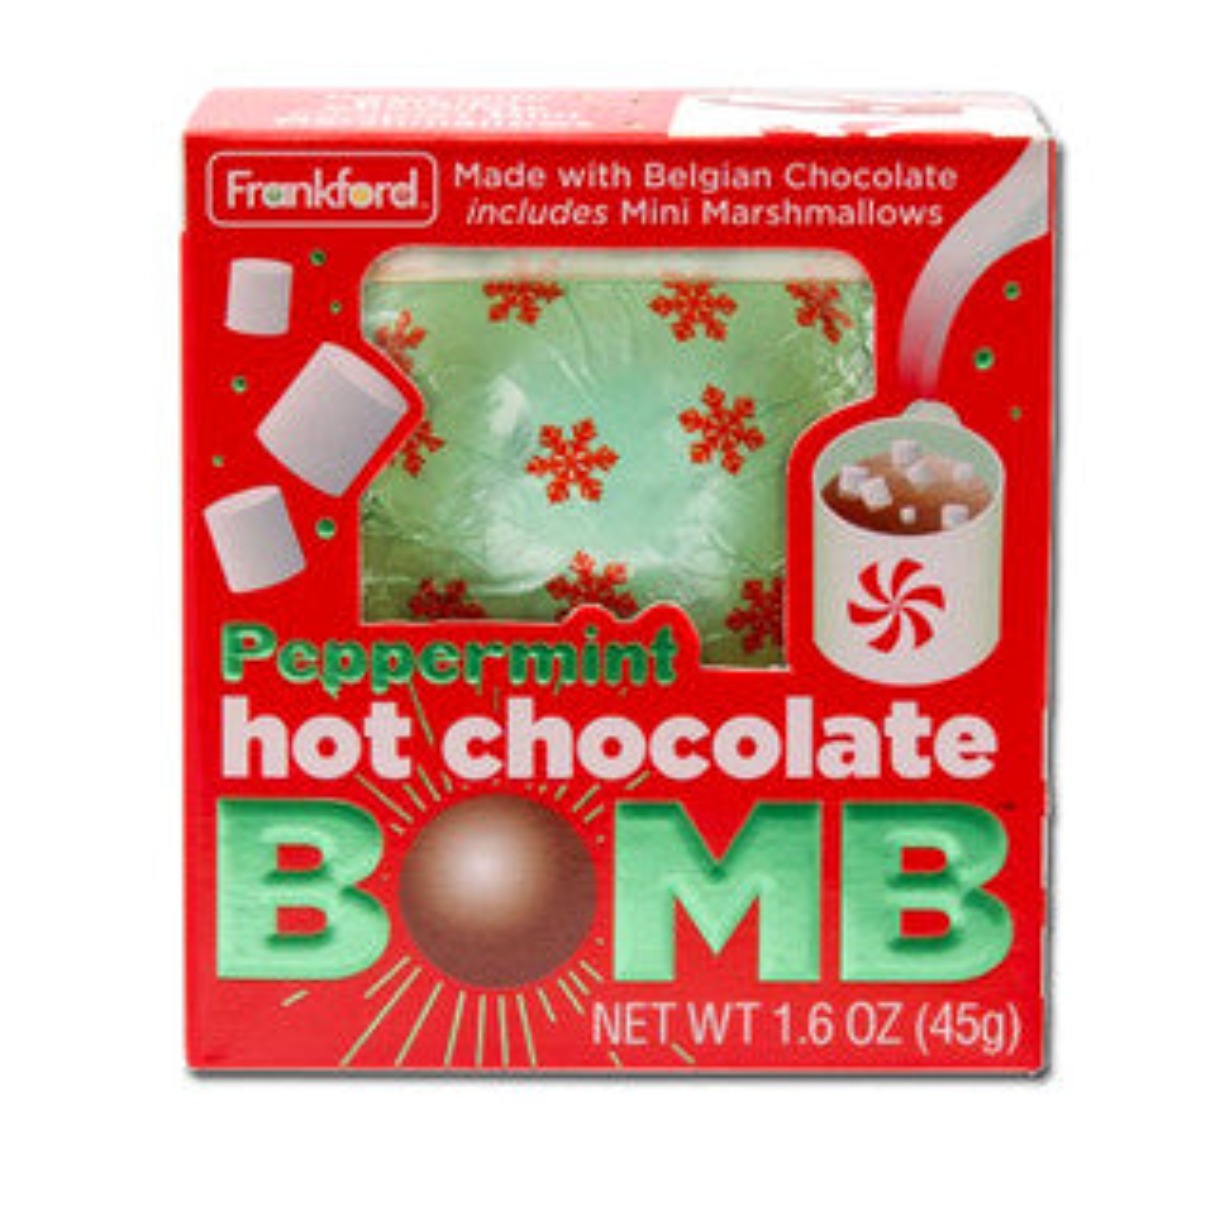 Frankford Hot Chocolate Peppermint Bomb 1.6oz - 12ct